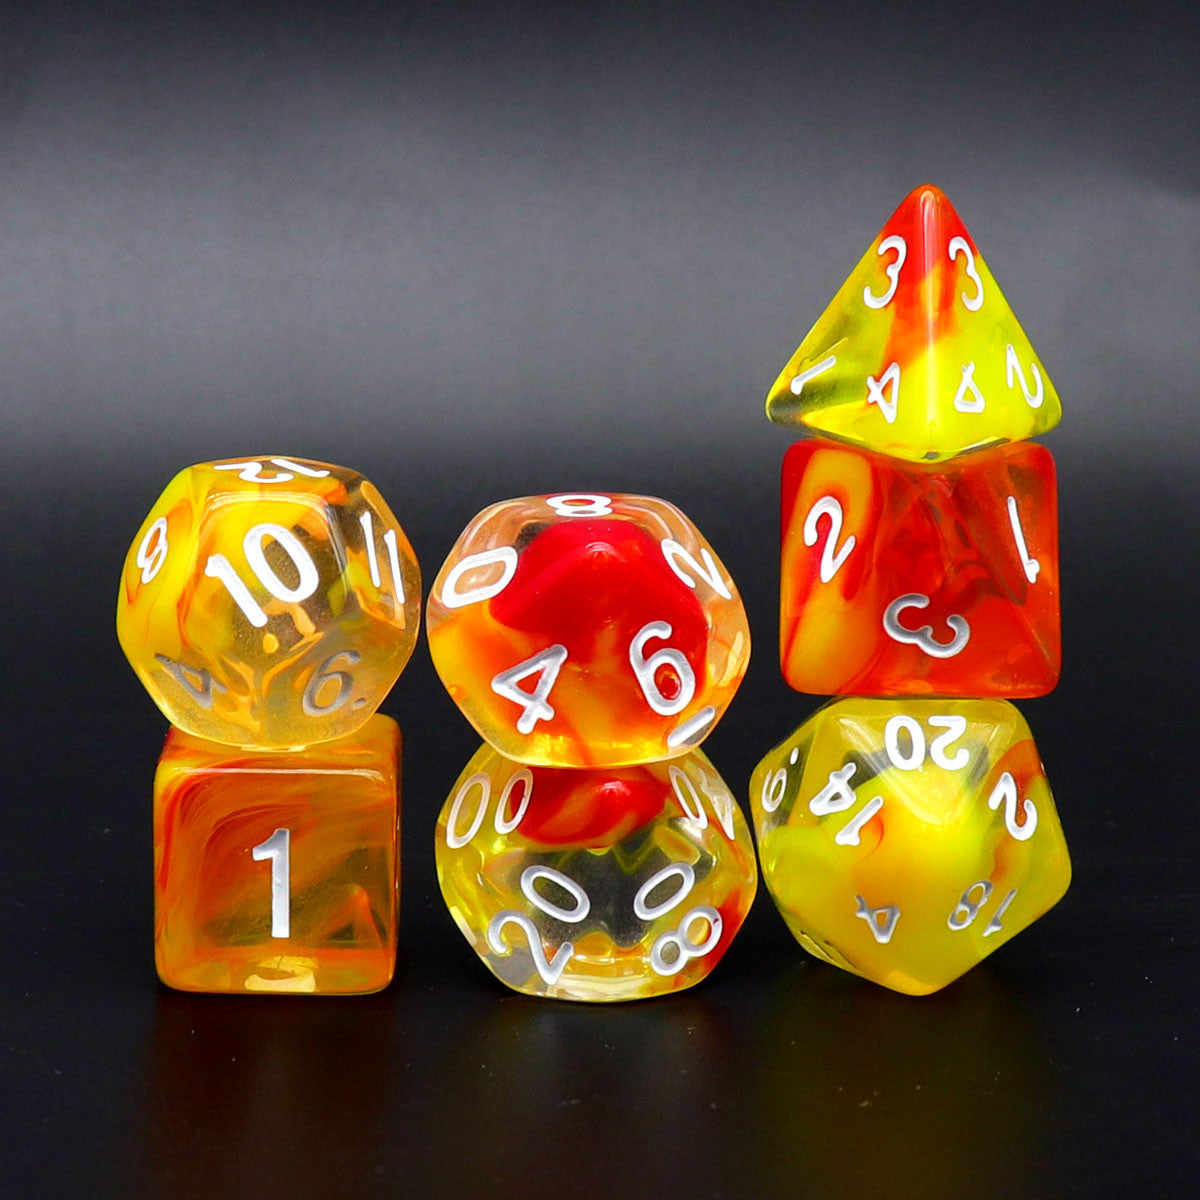 red yellow dice, yellow dice, red dice, clear dice, dnd dice rpg dice, polyhedral dice, dice set